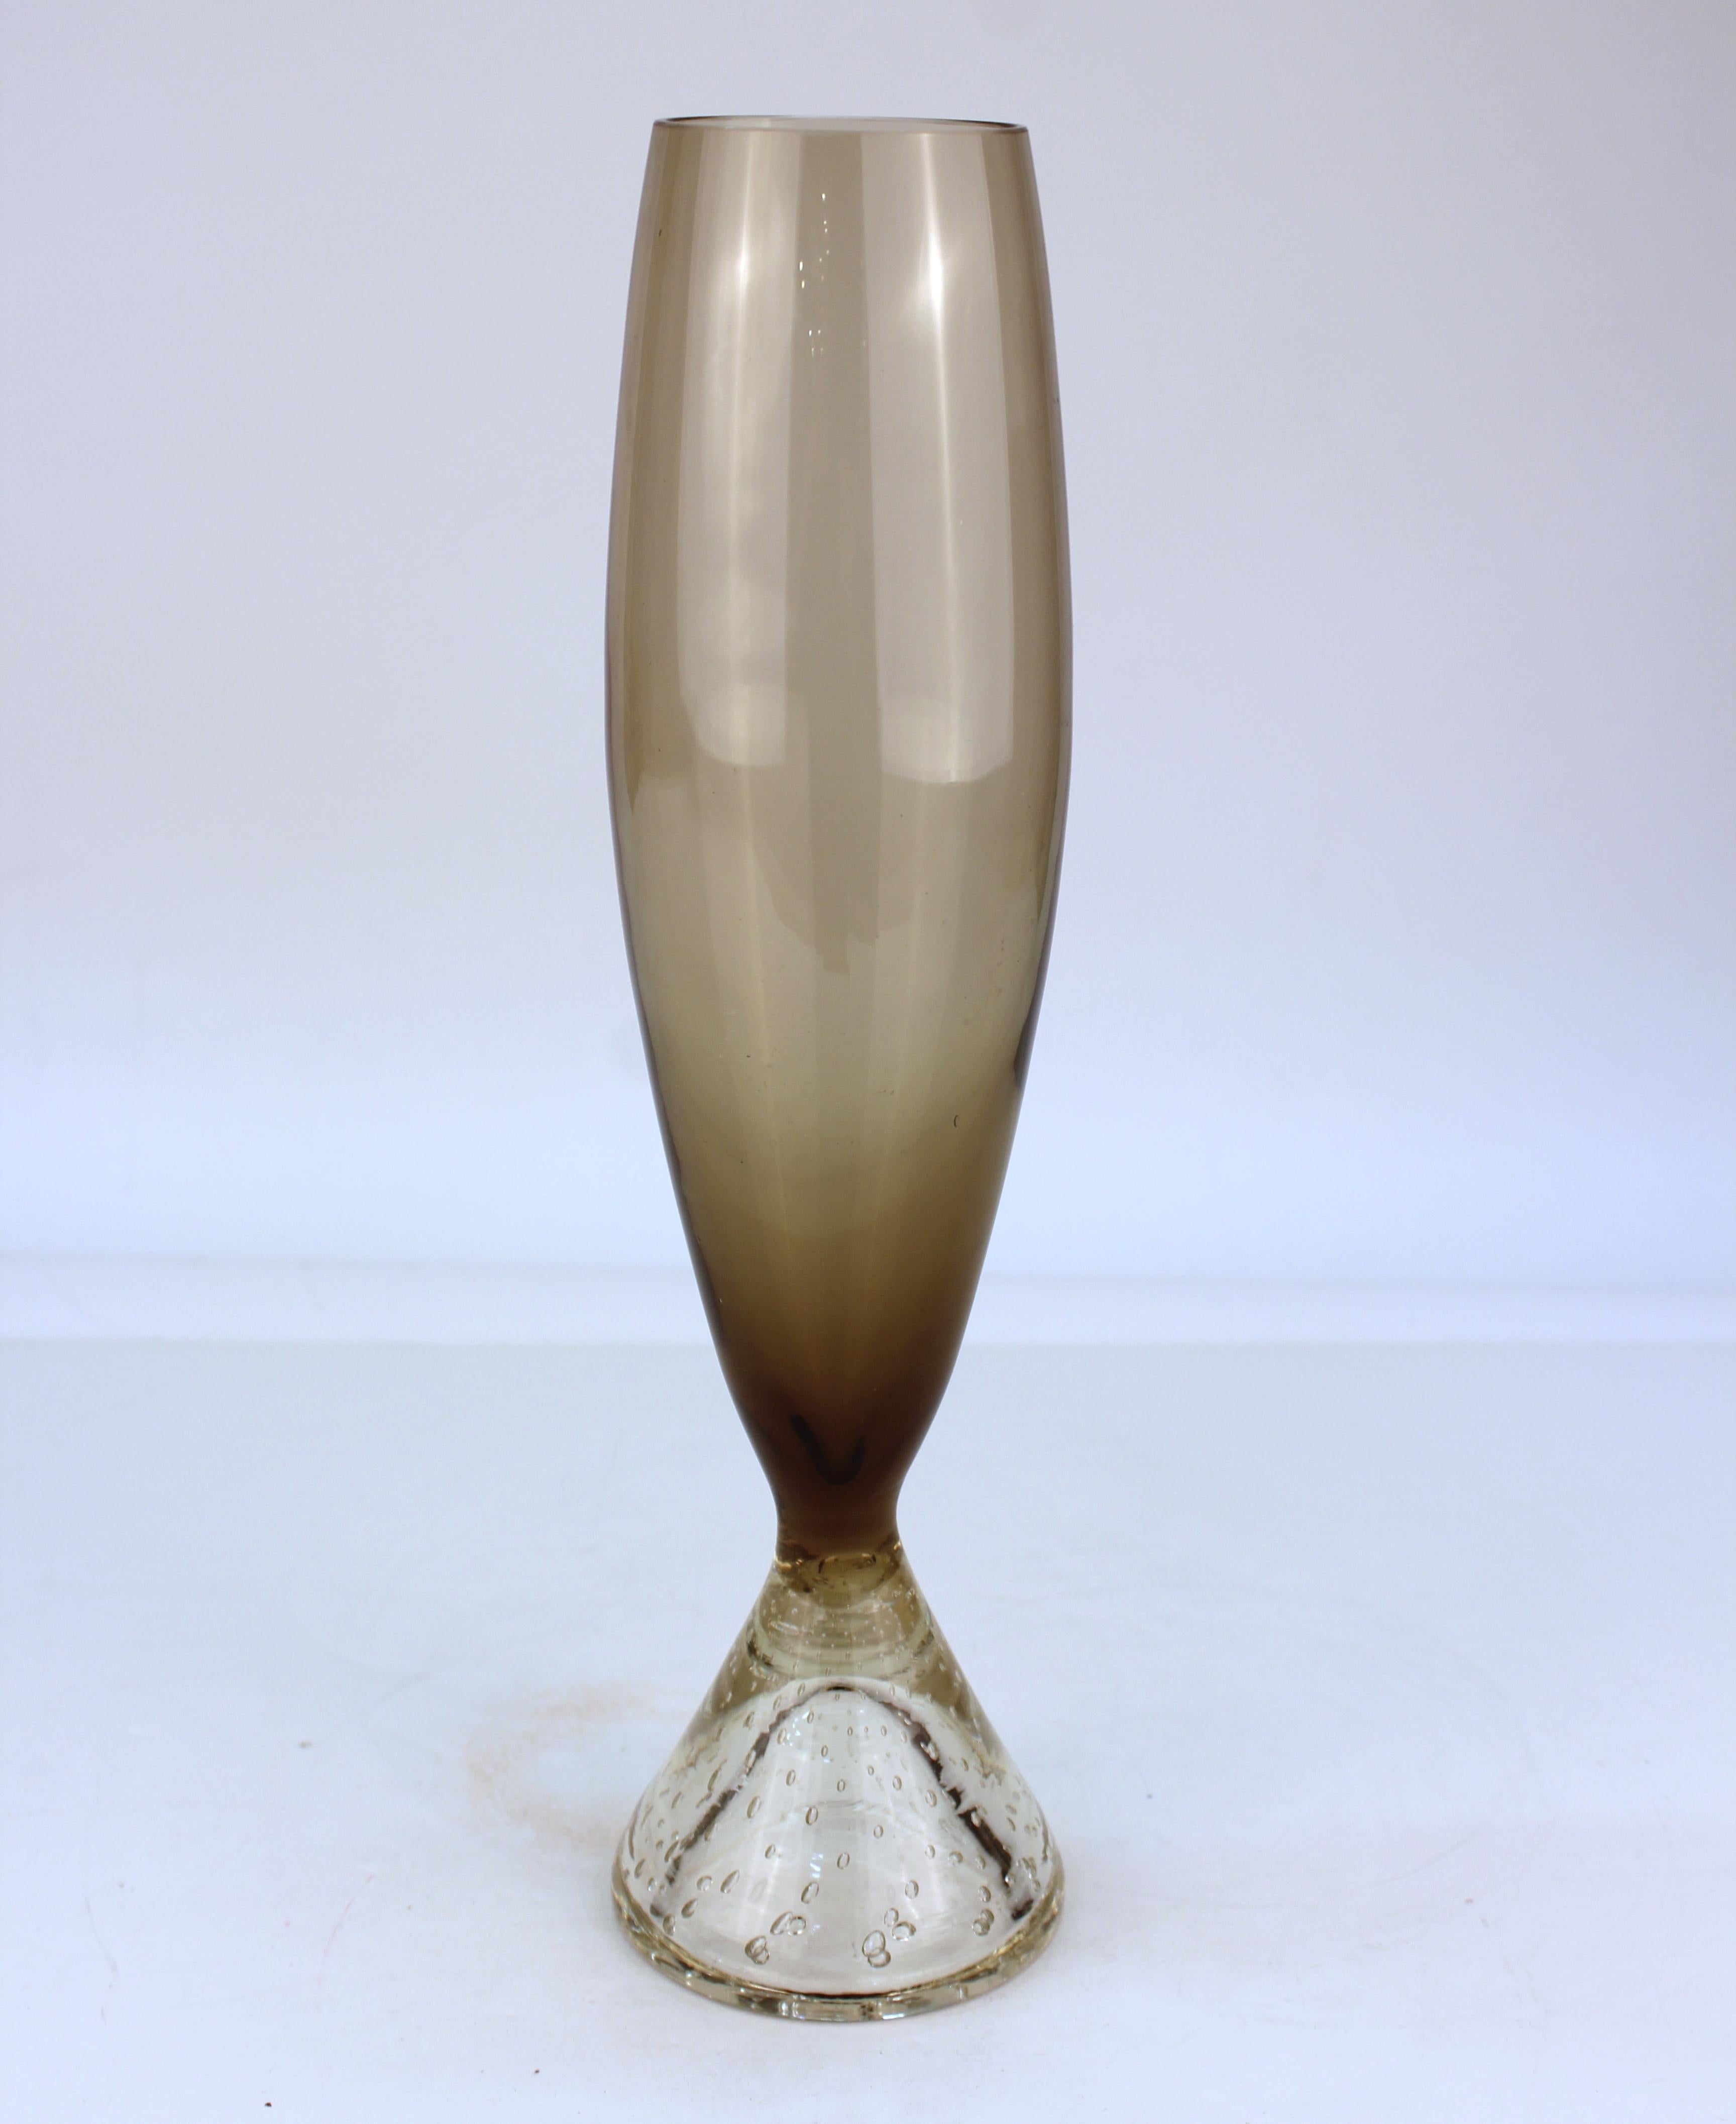 Italian Mid-Century Modern large glass chalice or vase with a base with controlled bubble inclusion. The piece is in great vintage condition.